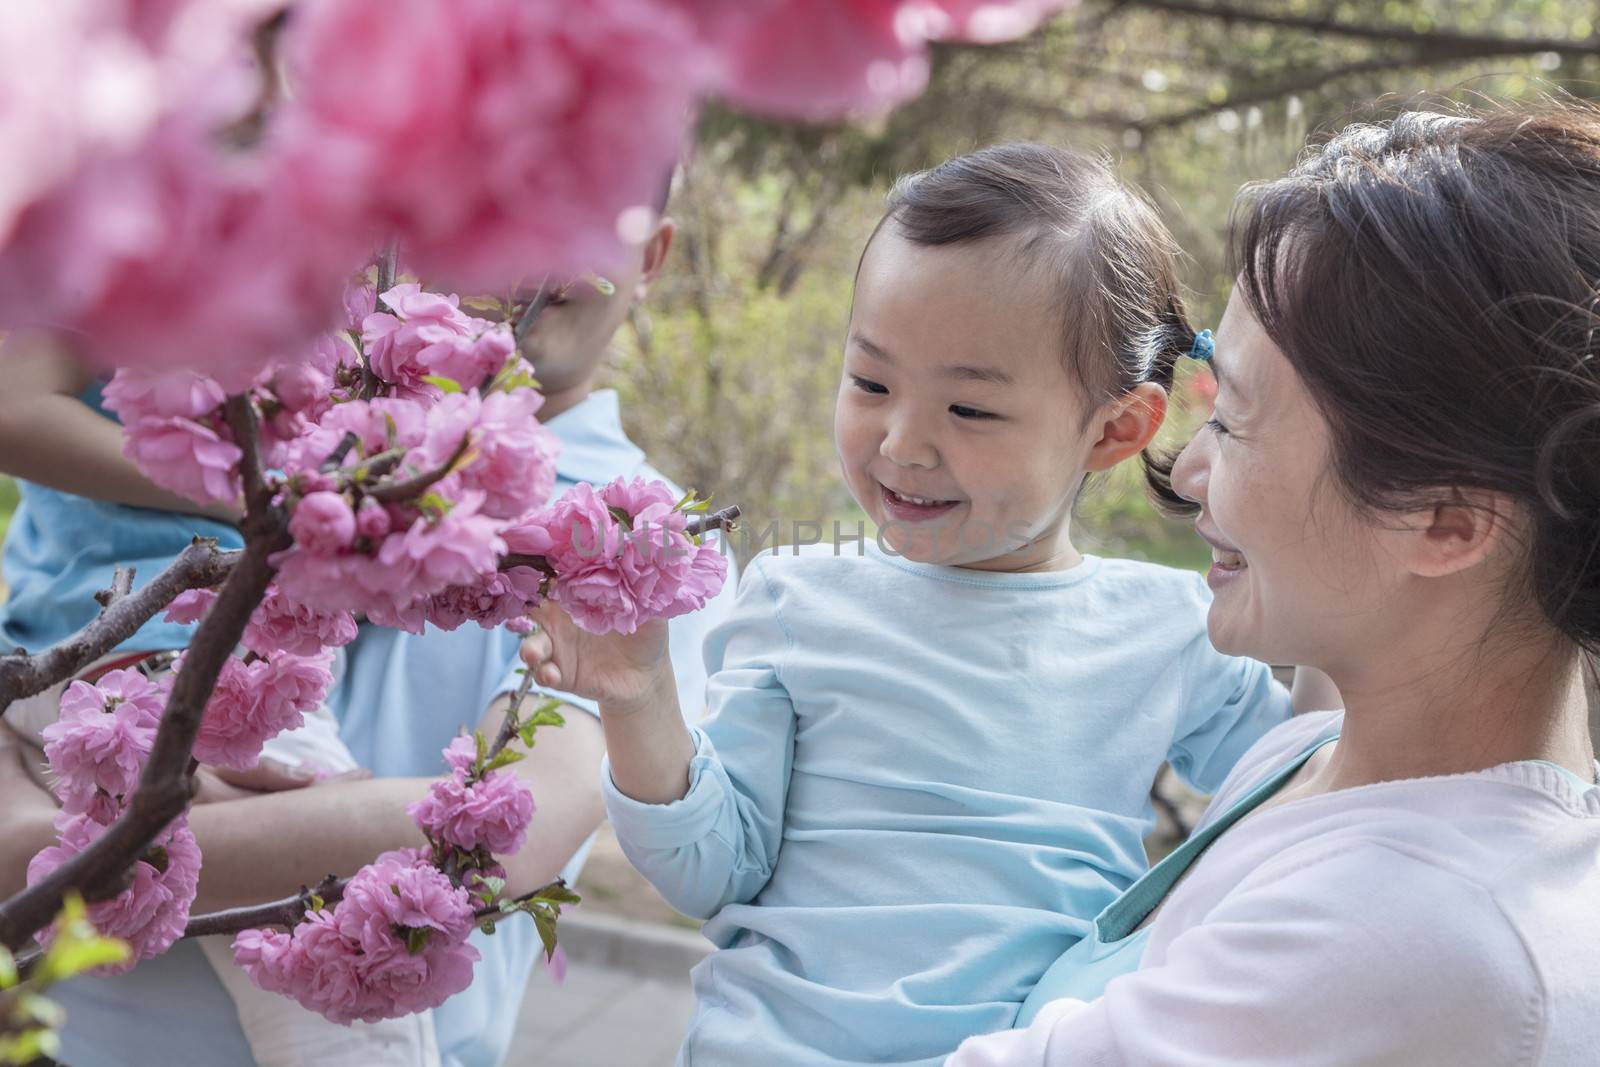 Mother holding daughter and looking at cherry blossoms.